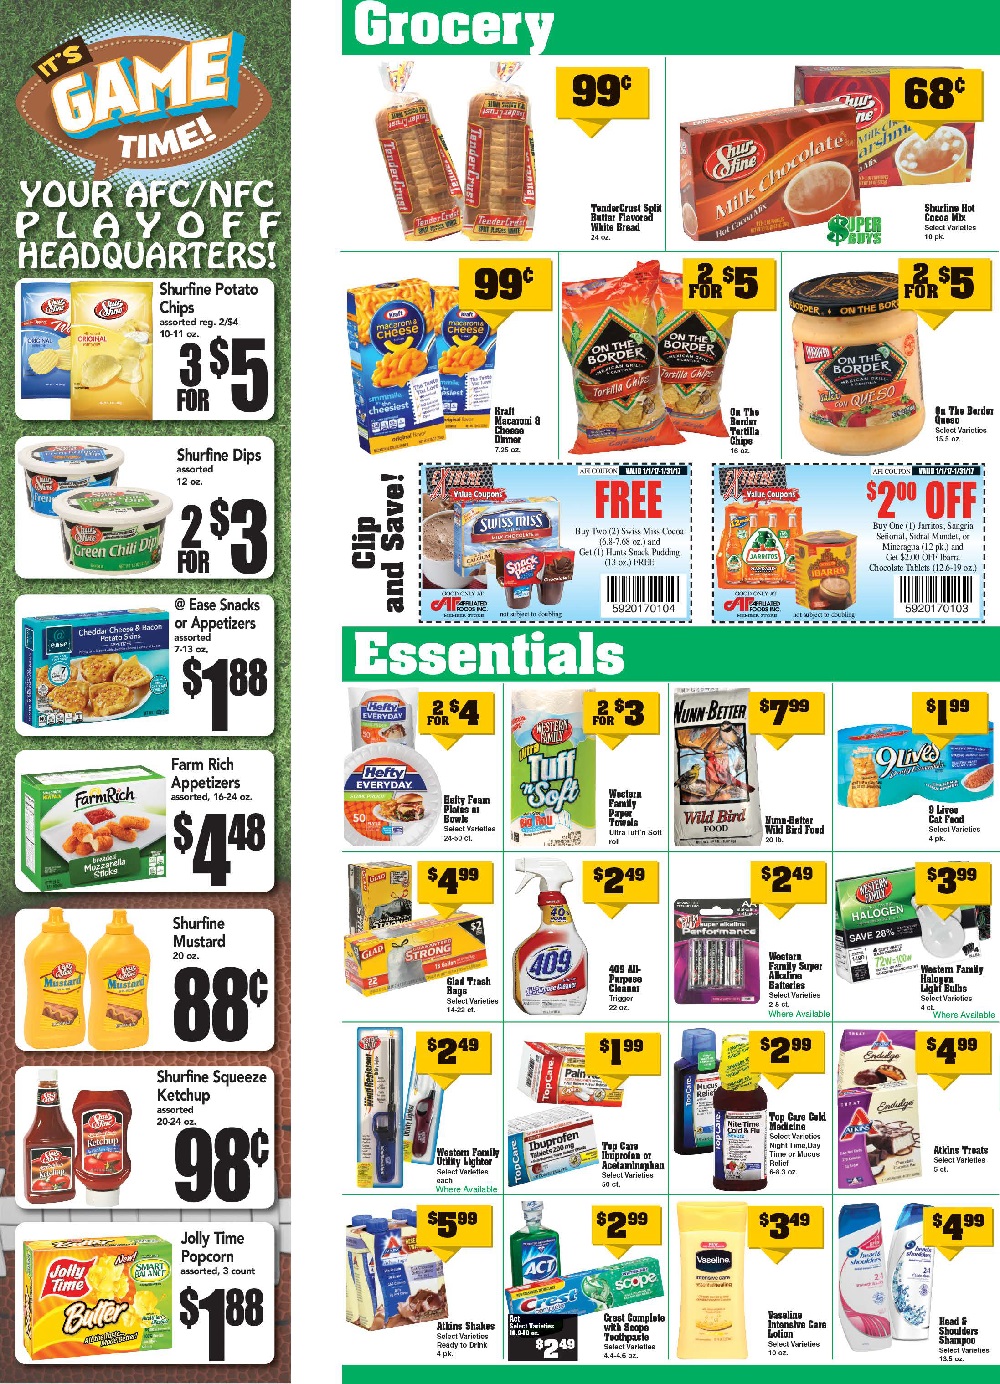 weekly-sales-for-january-11th-17th-pg2